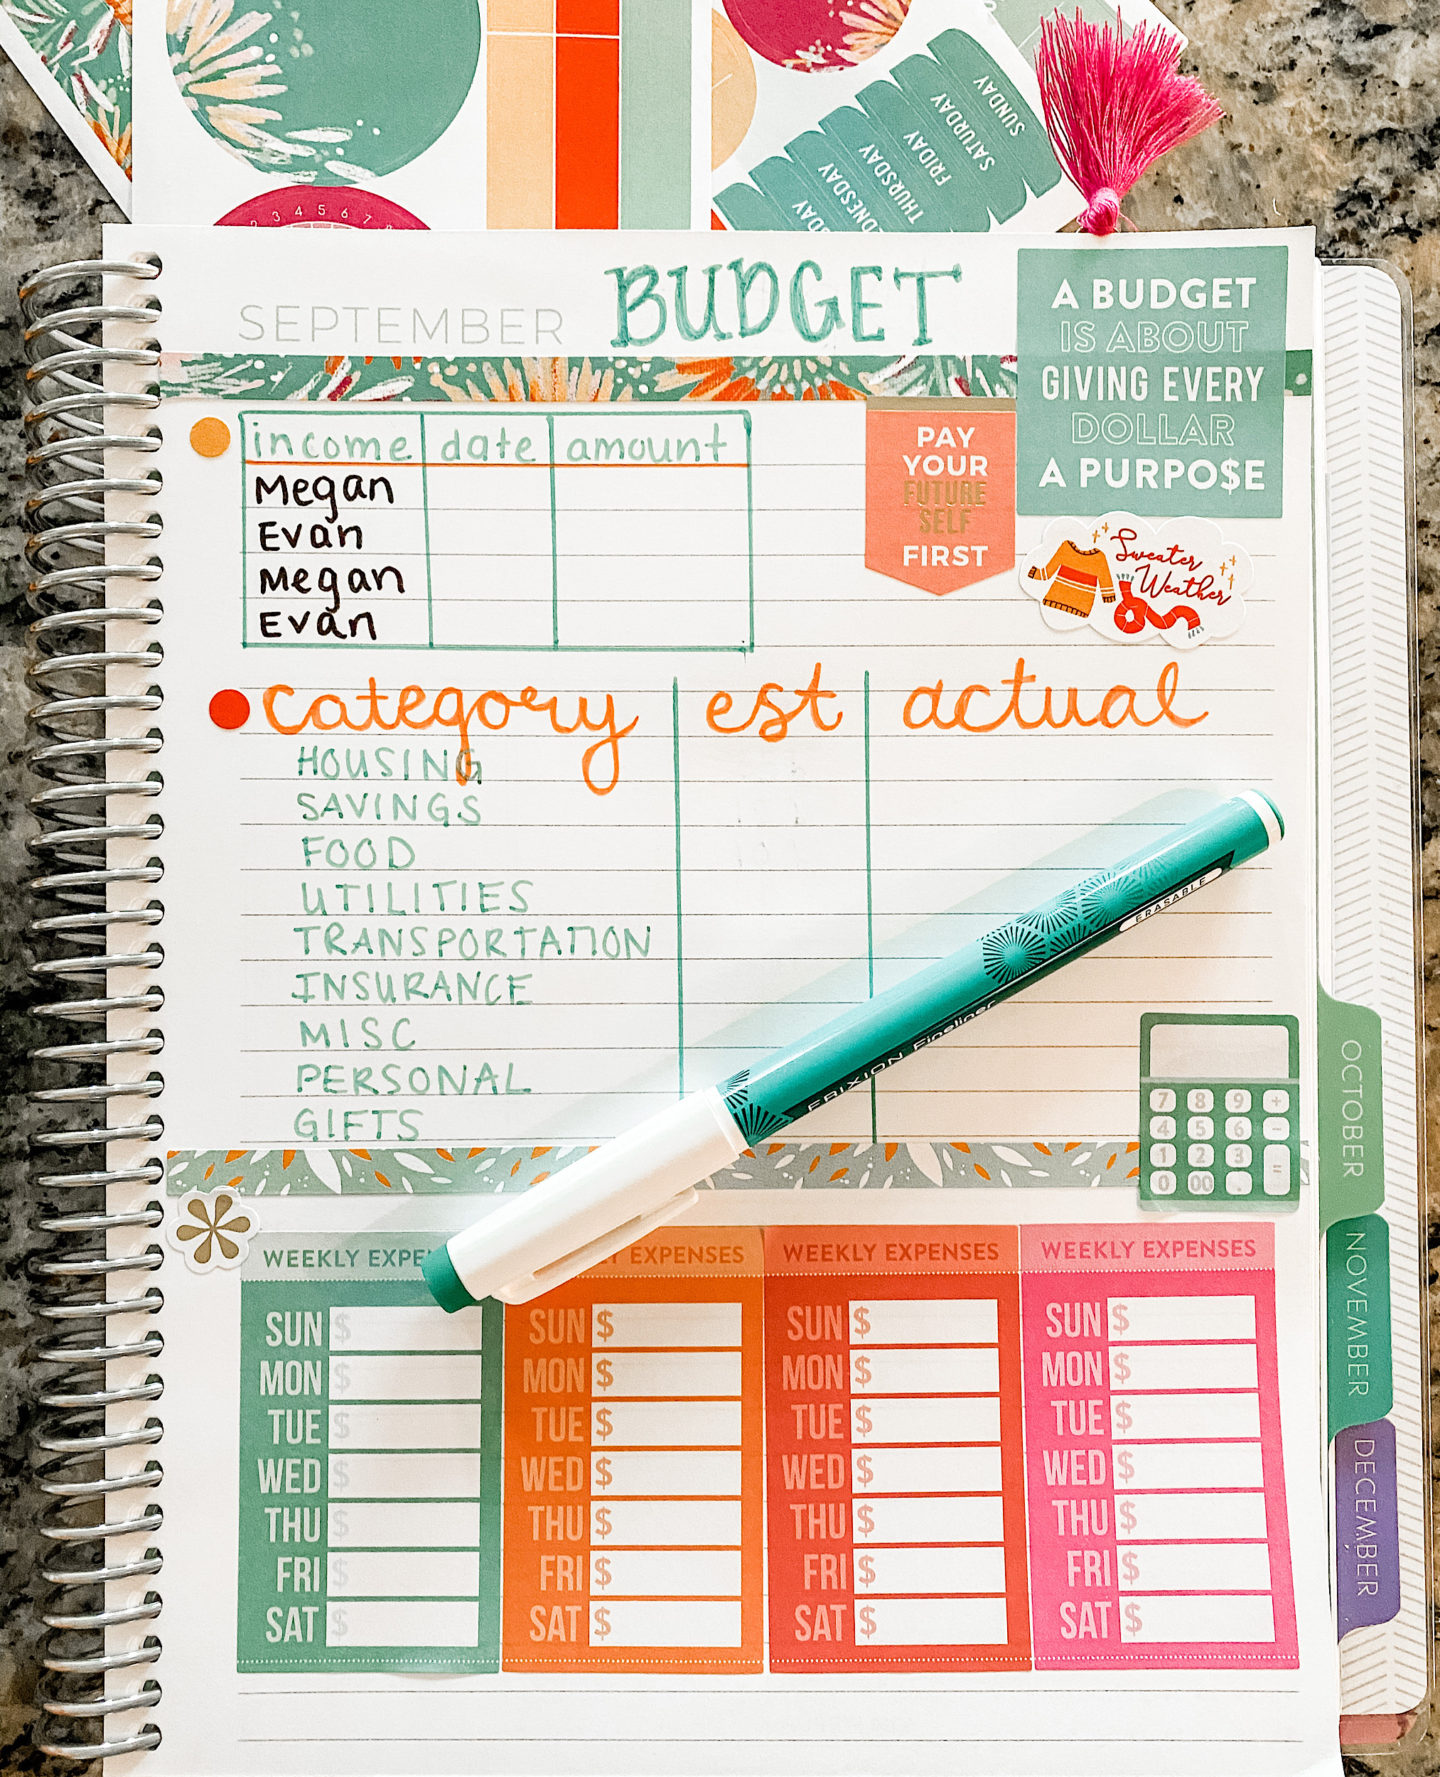 How to set up a monthly budget